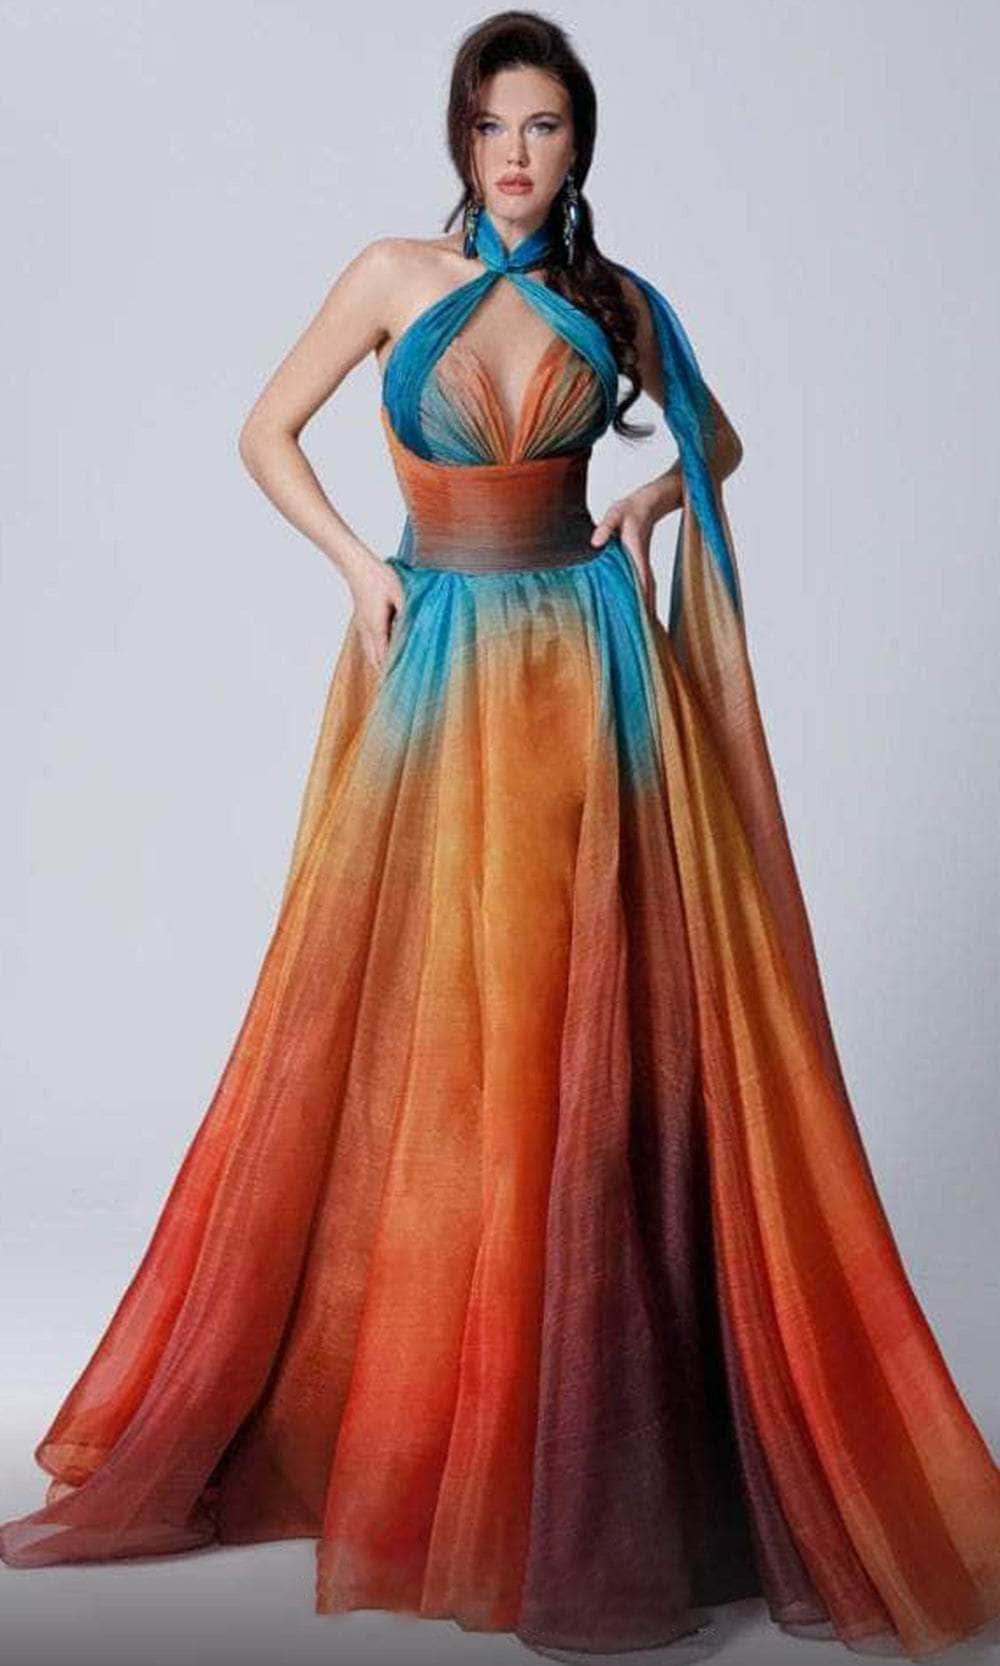 MNM COUTURE 2721A - Sleeveless Halter Neck Long Dress Prom Dresses 4 / Multicolor